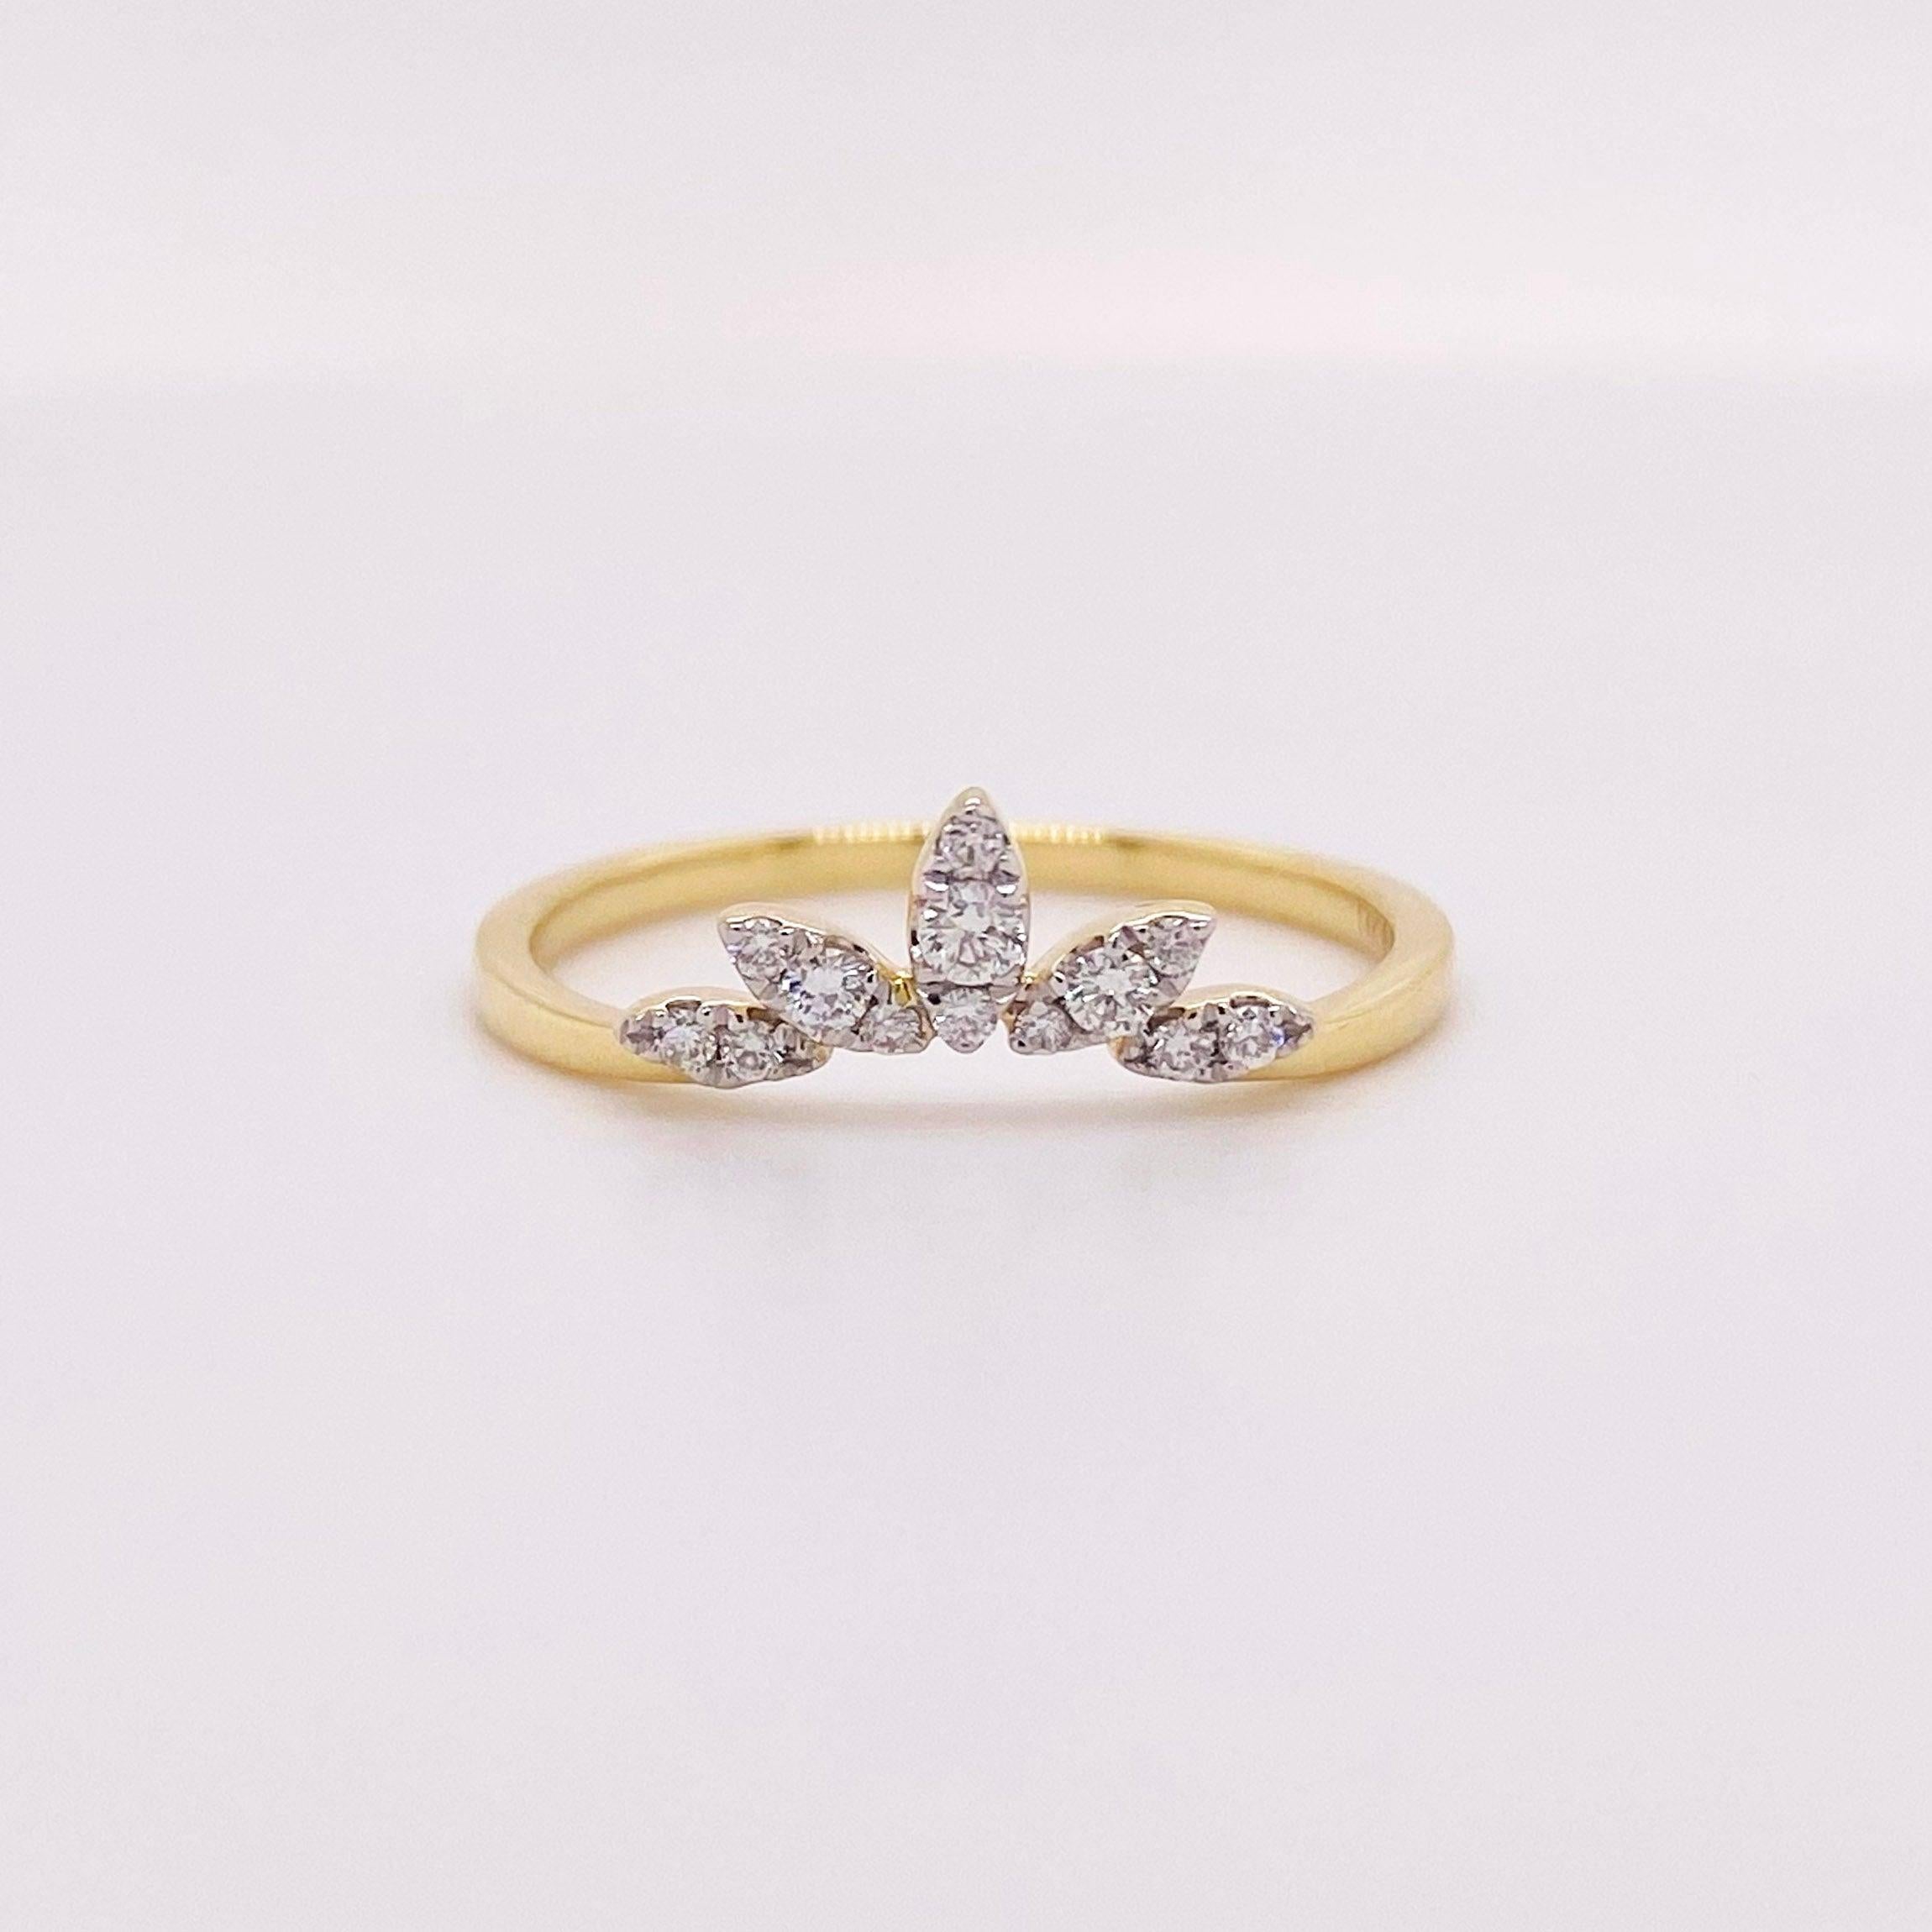 For Sale:  Diamond Crown Ring, 14 Karat Yellow Gold Curved Band, Round, Marquise 6